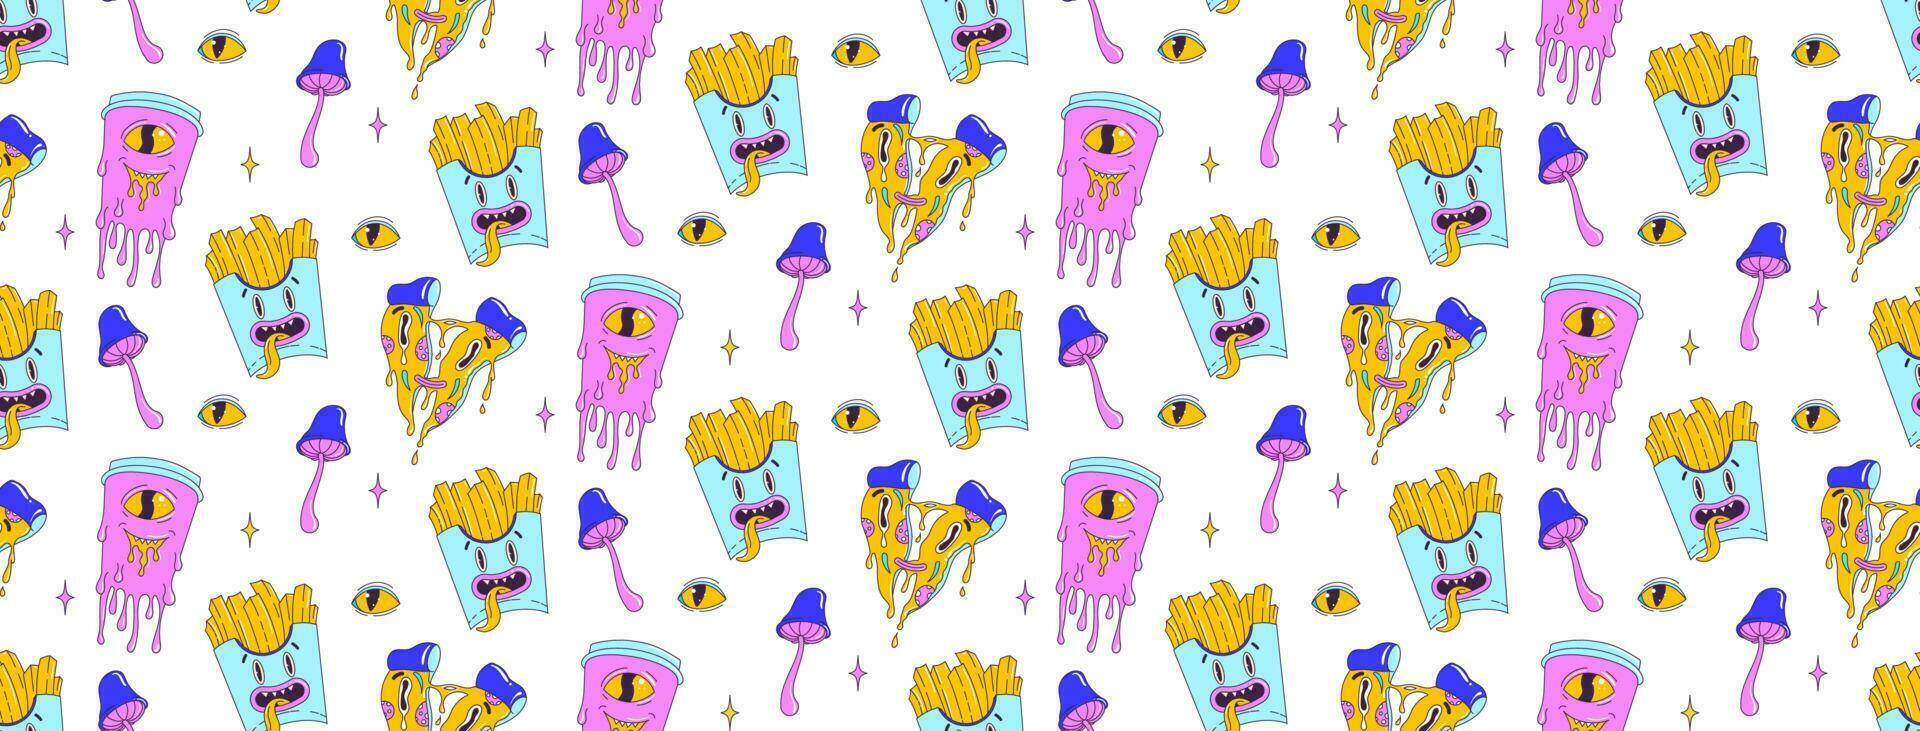 Psychedelic seamless pattern with weird cartoon fast food character and elements. Pizza, french fries, soda. Contemporary trendy vector illustration.